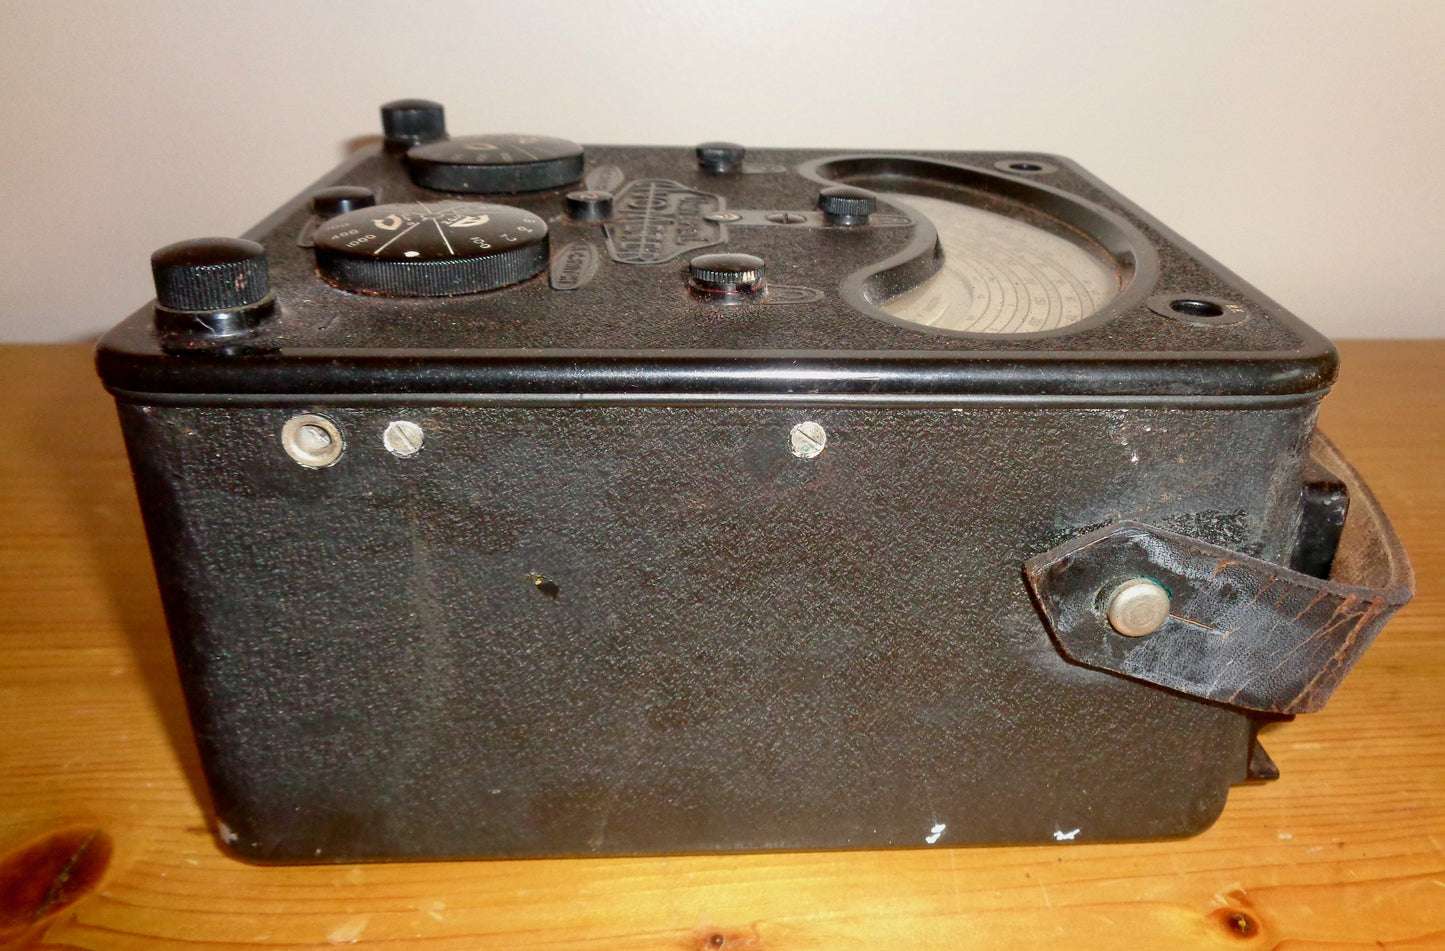 1940s Universal Avometer Model 7 With Tan Leather Transit Case